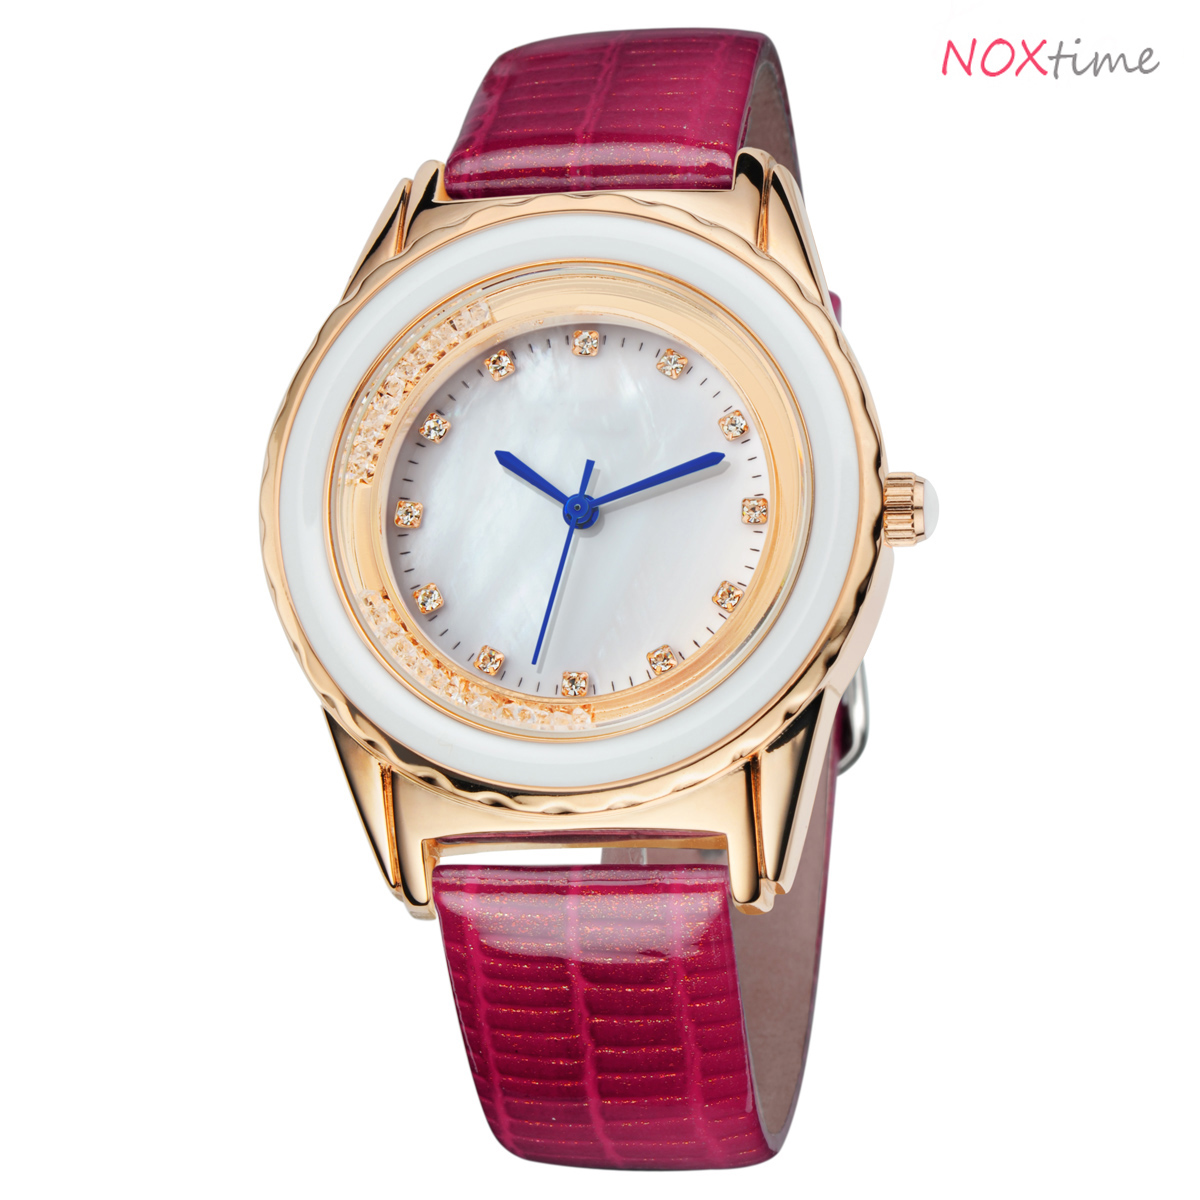 #2512 PU Leather Strap Shell Dial Watch Quartz Wrist Watch Best Birthday Gift for Women( rose red)